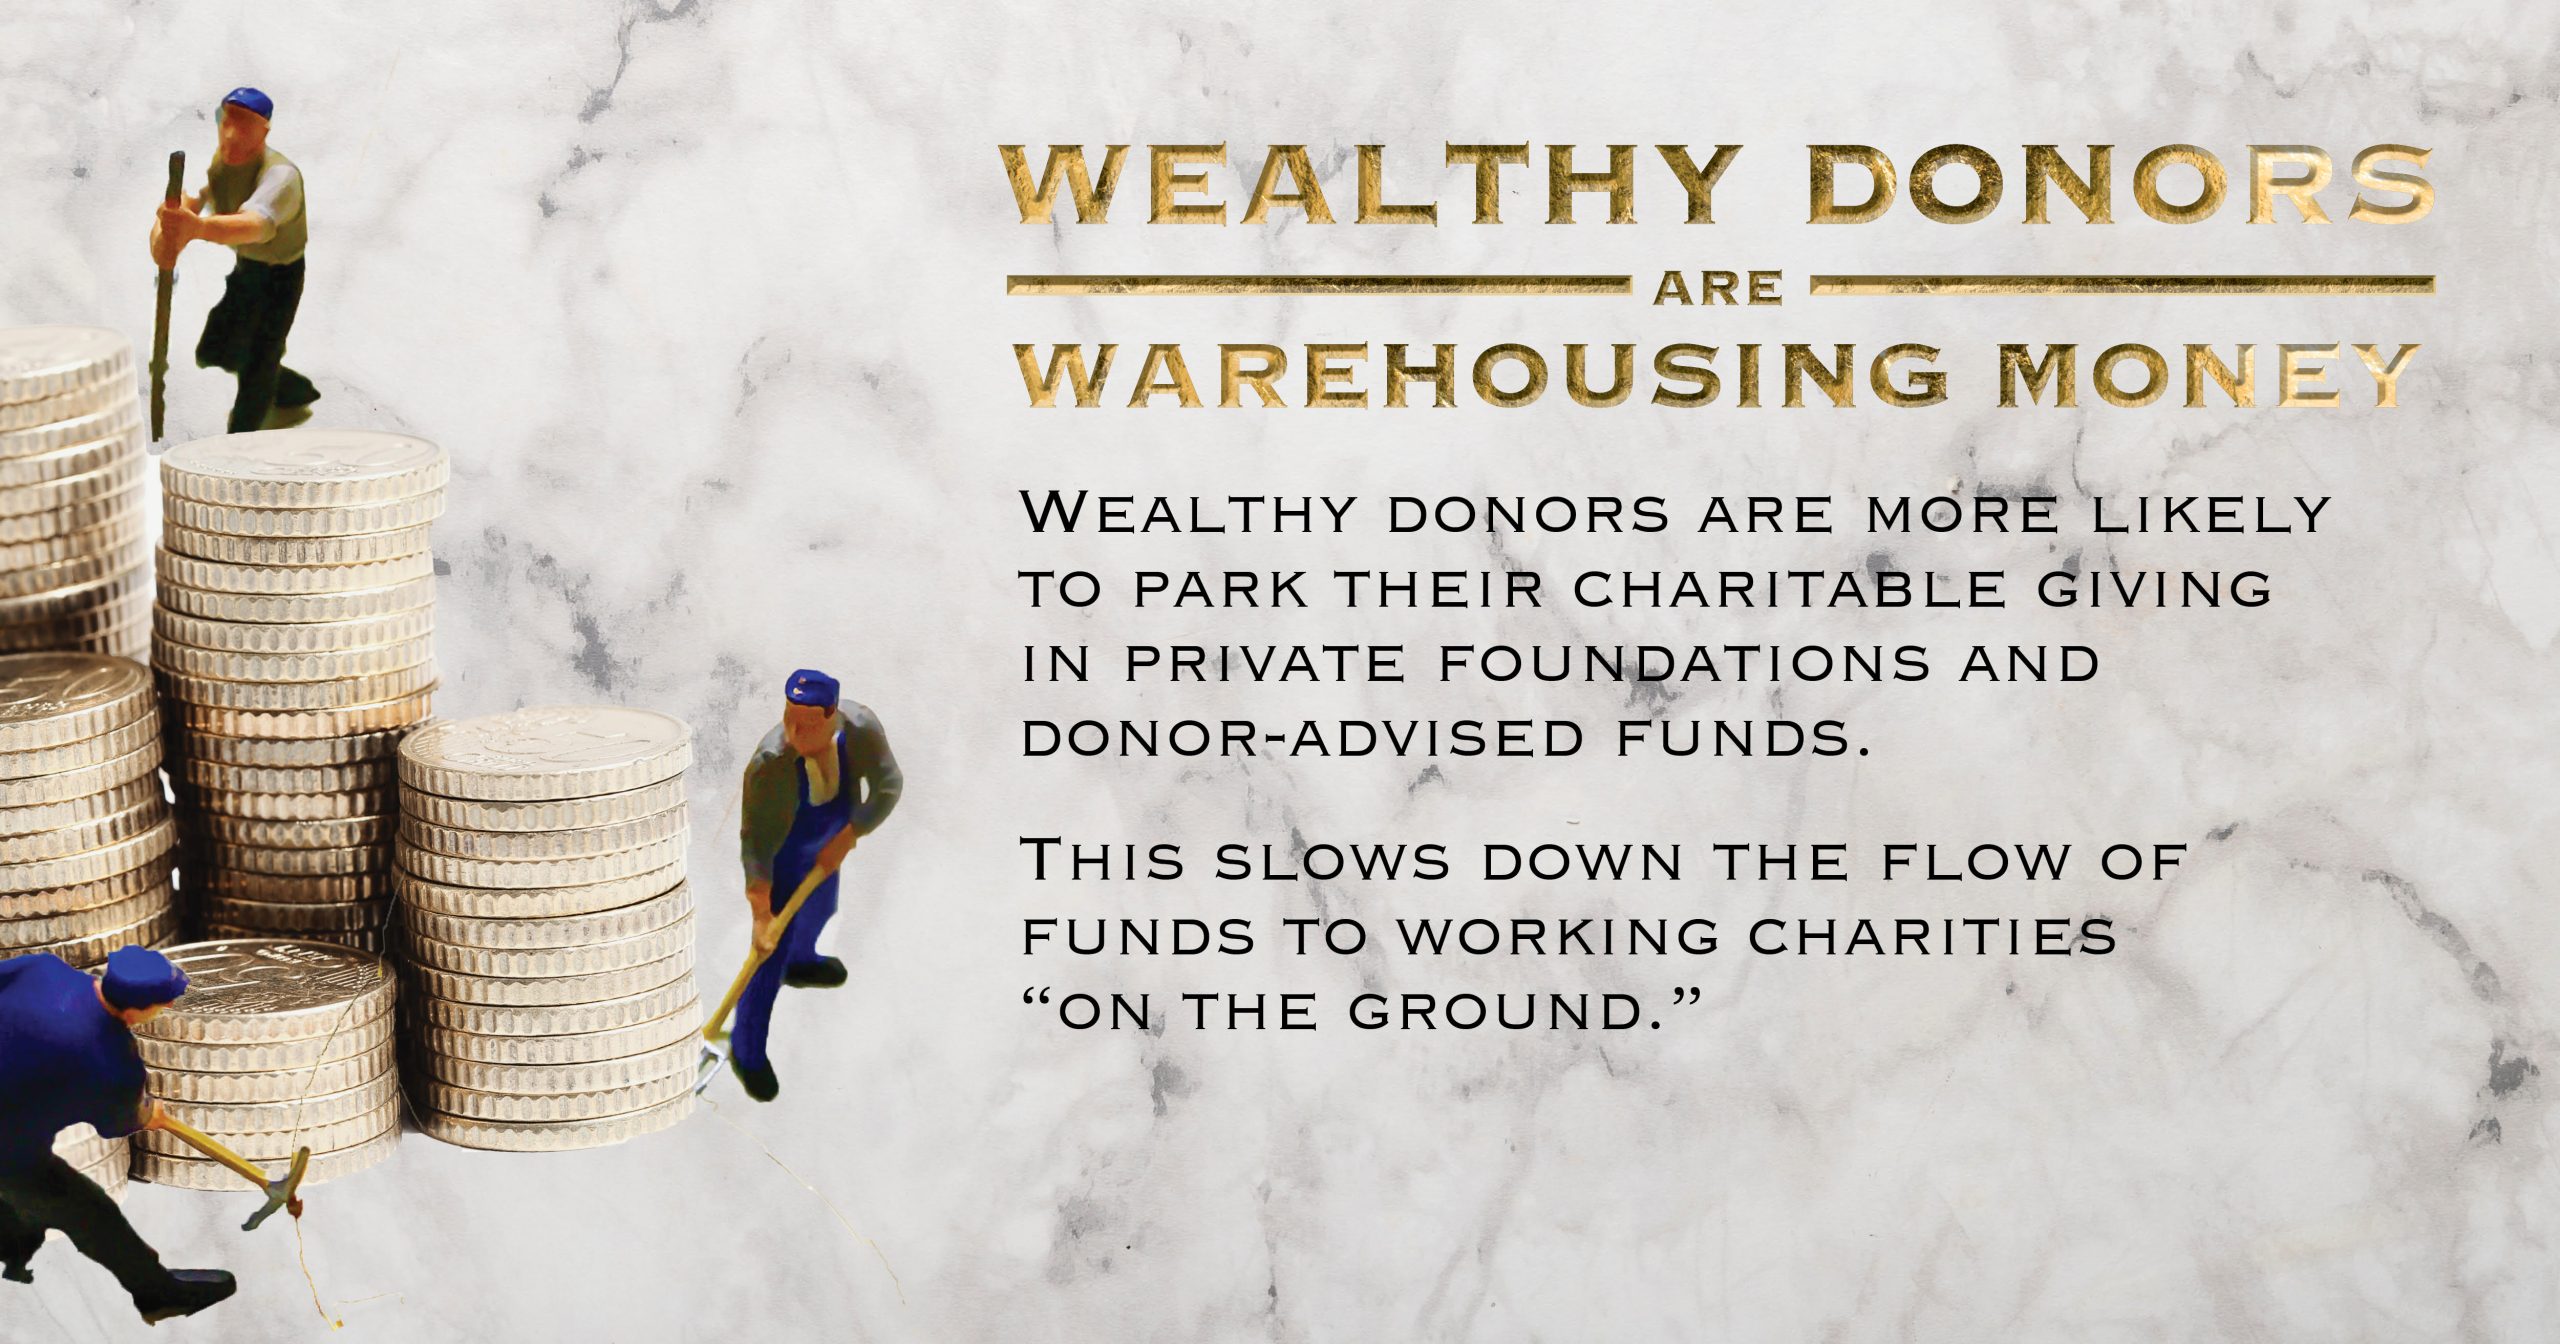 Wealthy donors are warehousing money. Wealthy donors are more likely to park their charitable giving in private foundations and donor-advised funds. This slows down the flow of funds to working charities "on the ground".